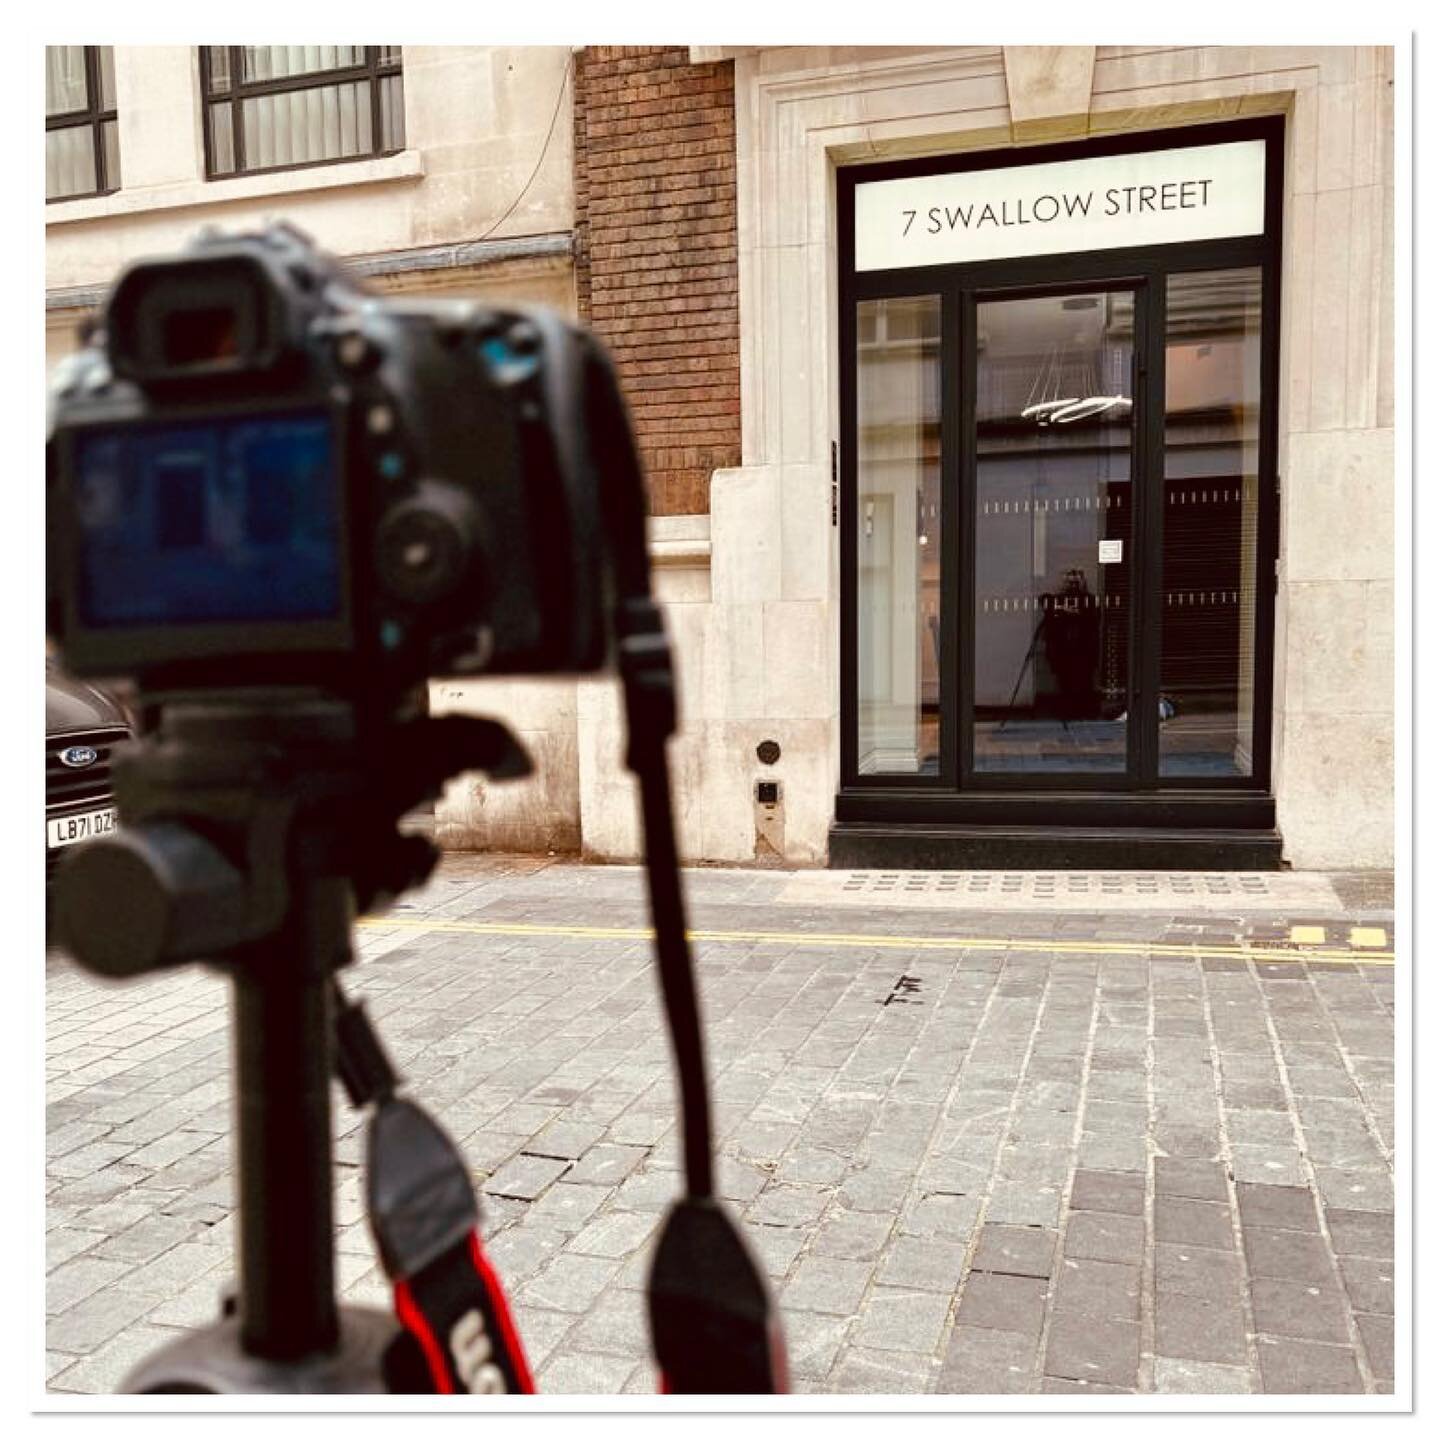 S H O O T&nbsp; D A Y
&nbsp;
We&rsquo;re working on something special at the moment, so we took a trip down memory lane yesterday, shooting the external fa&ccedil;ade at many of the buildings where we have completed projects.
&nbsp;
Our resident phot